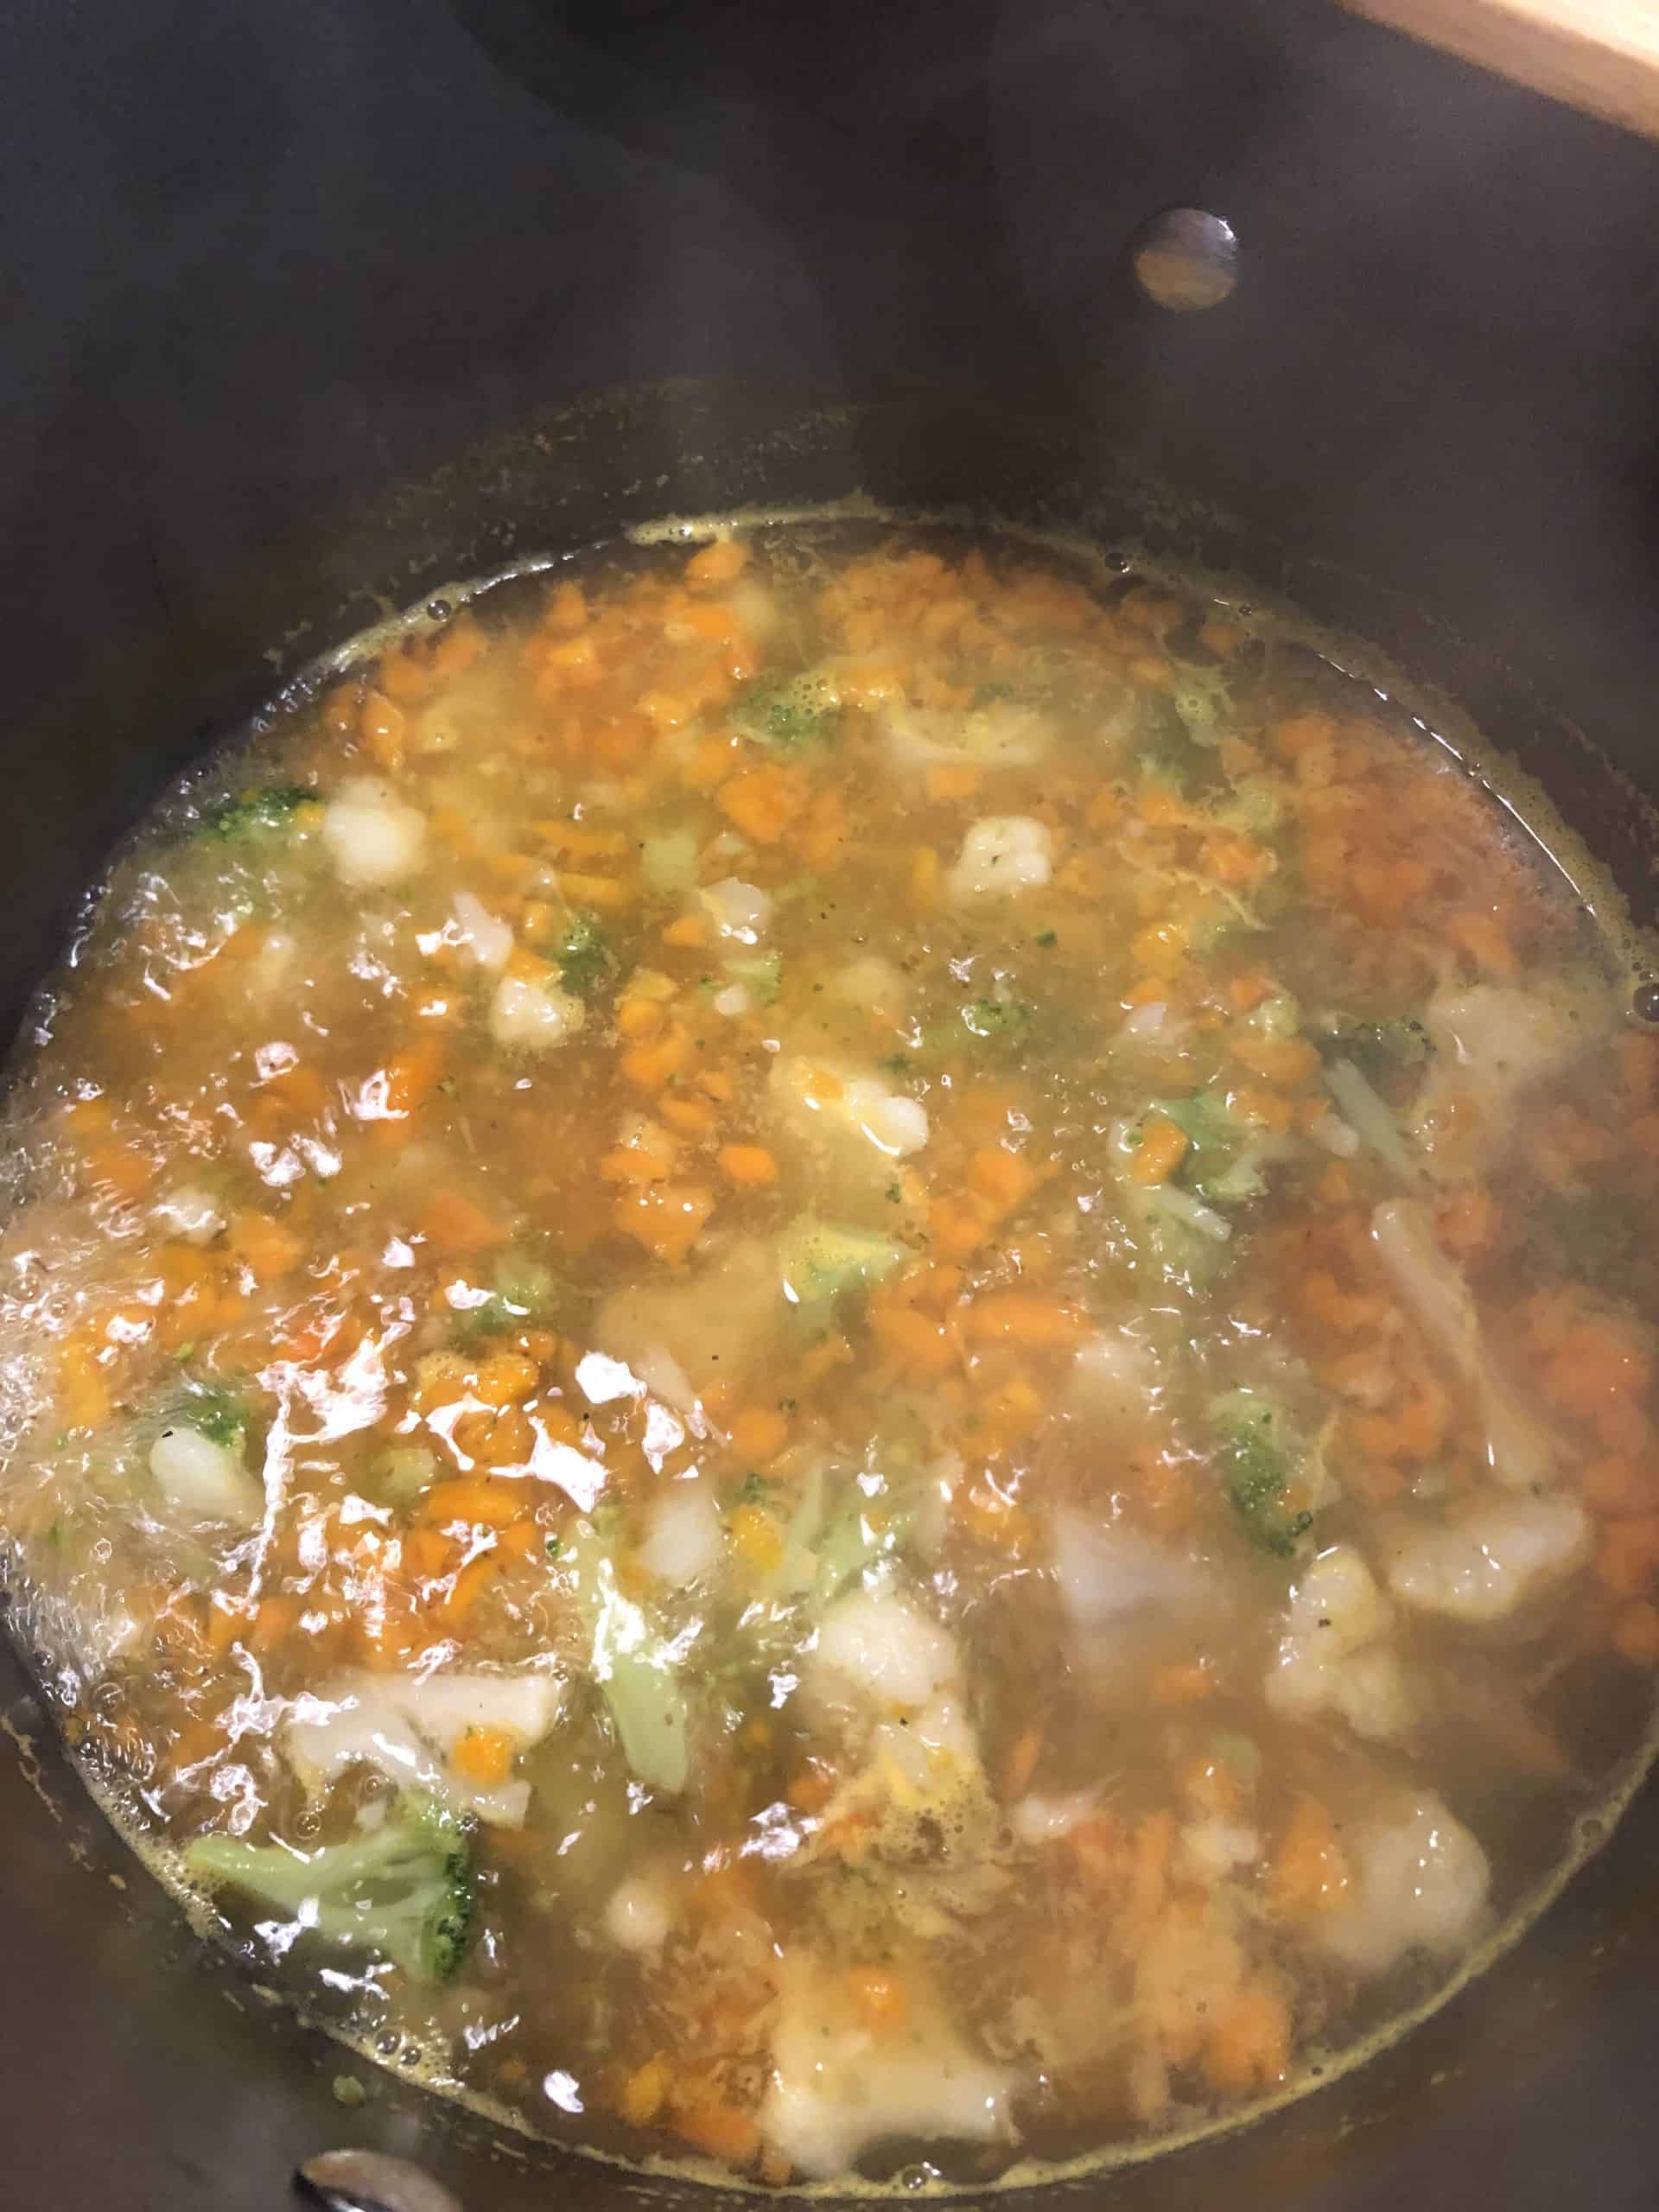 Mixed-up Chopped Carrots, Broccoli and Cauliflower in Chicken Broth